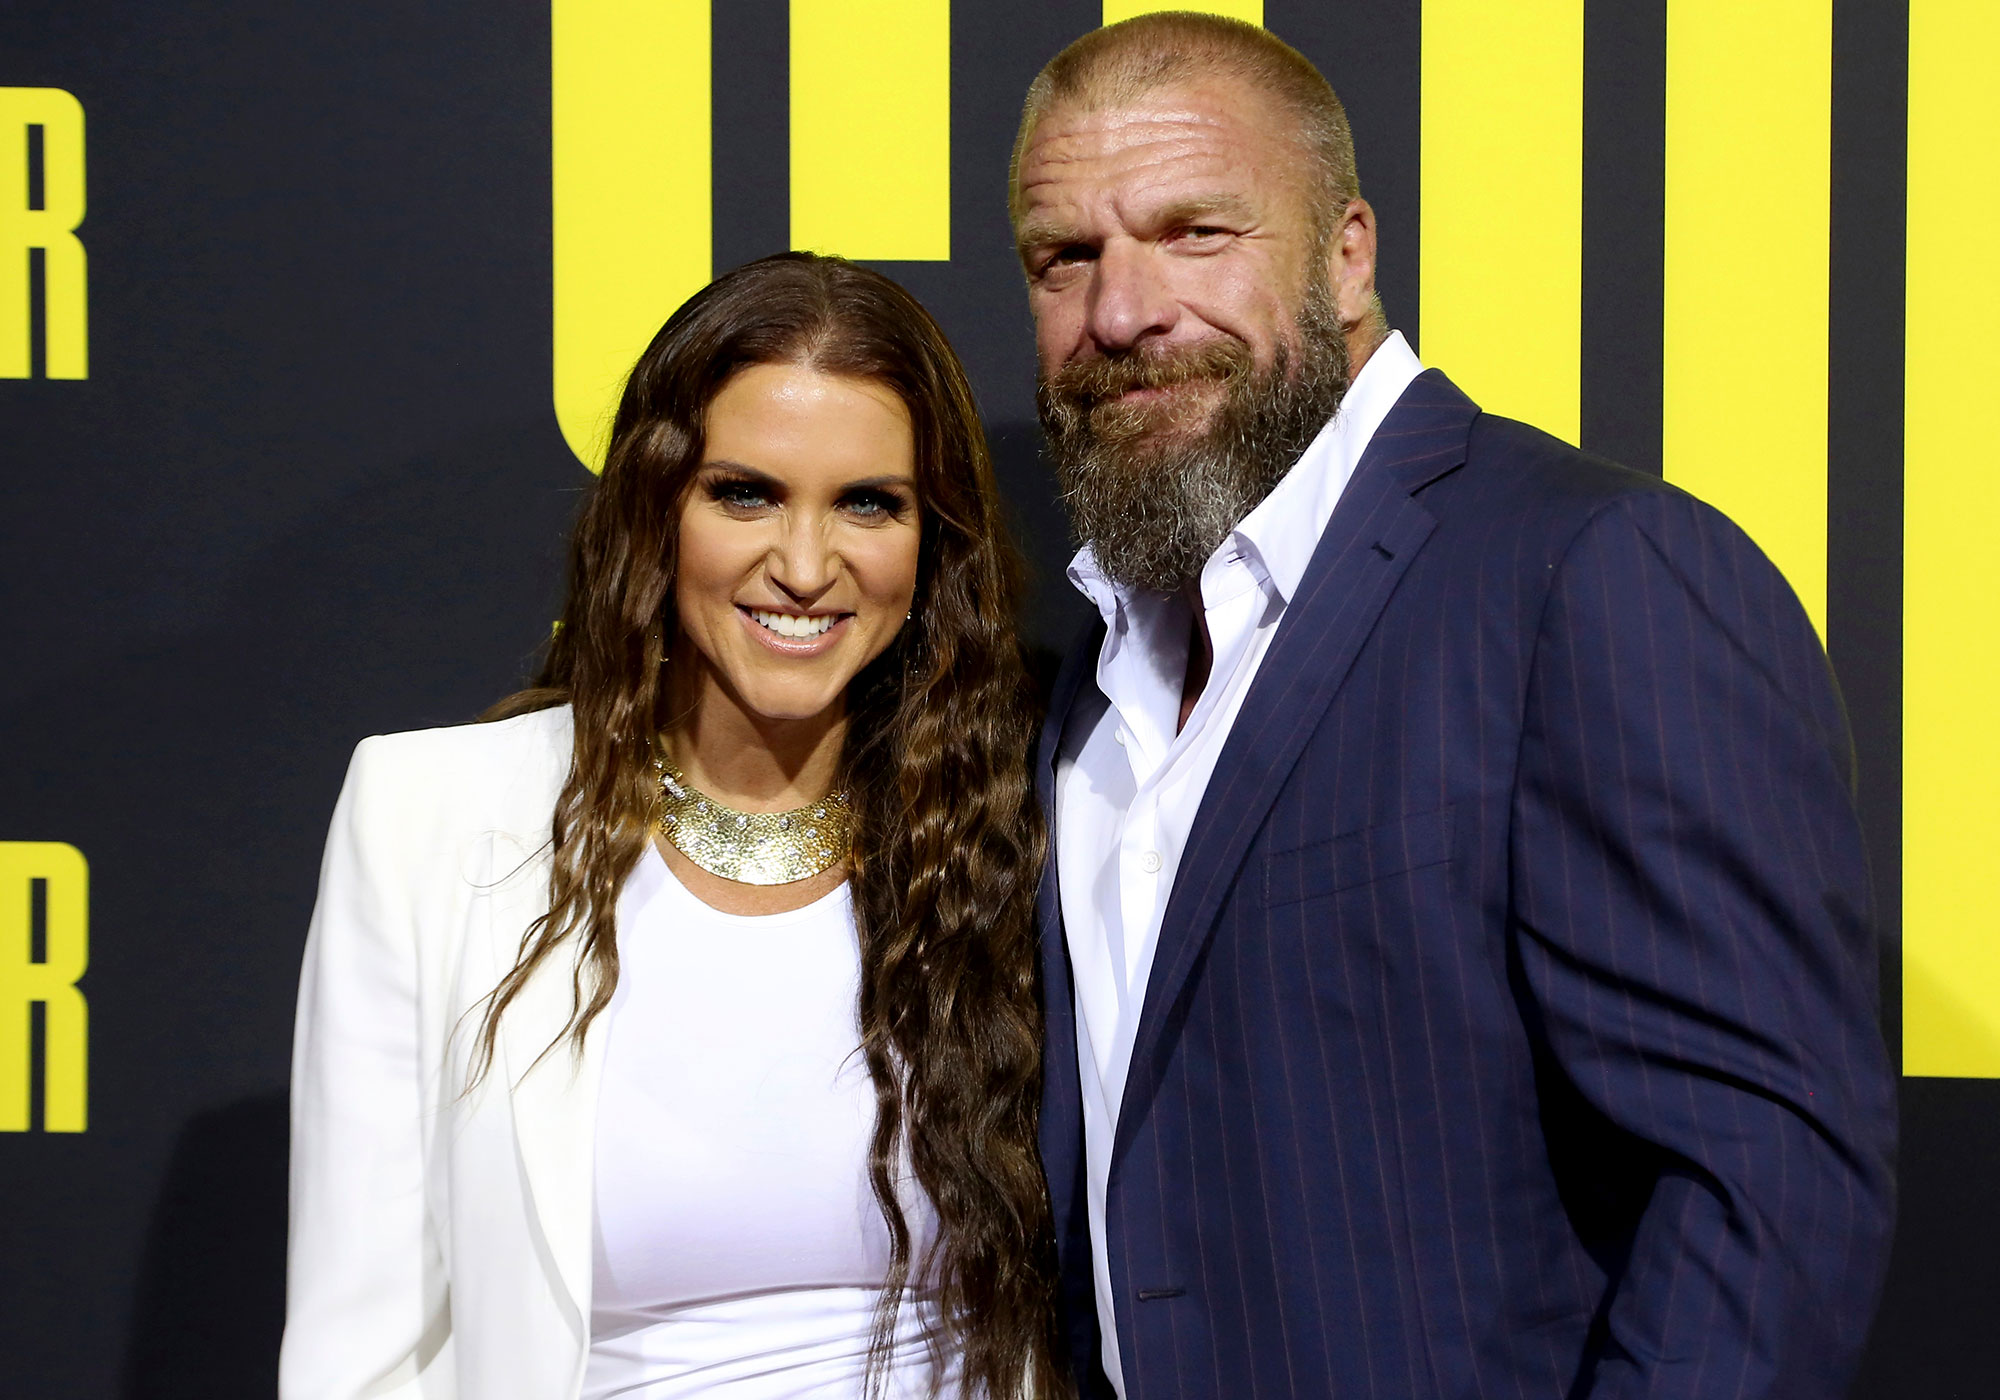 Stephanic Mcmohen Sex Videous - WWE's Stephanie McMahon and Wrestler Triple H's Relationship Timeline